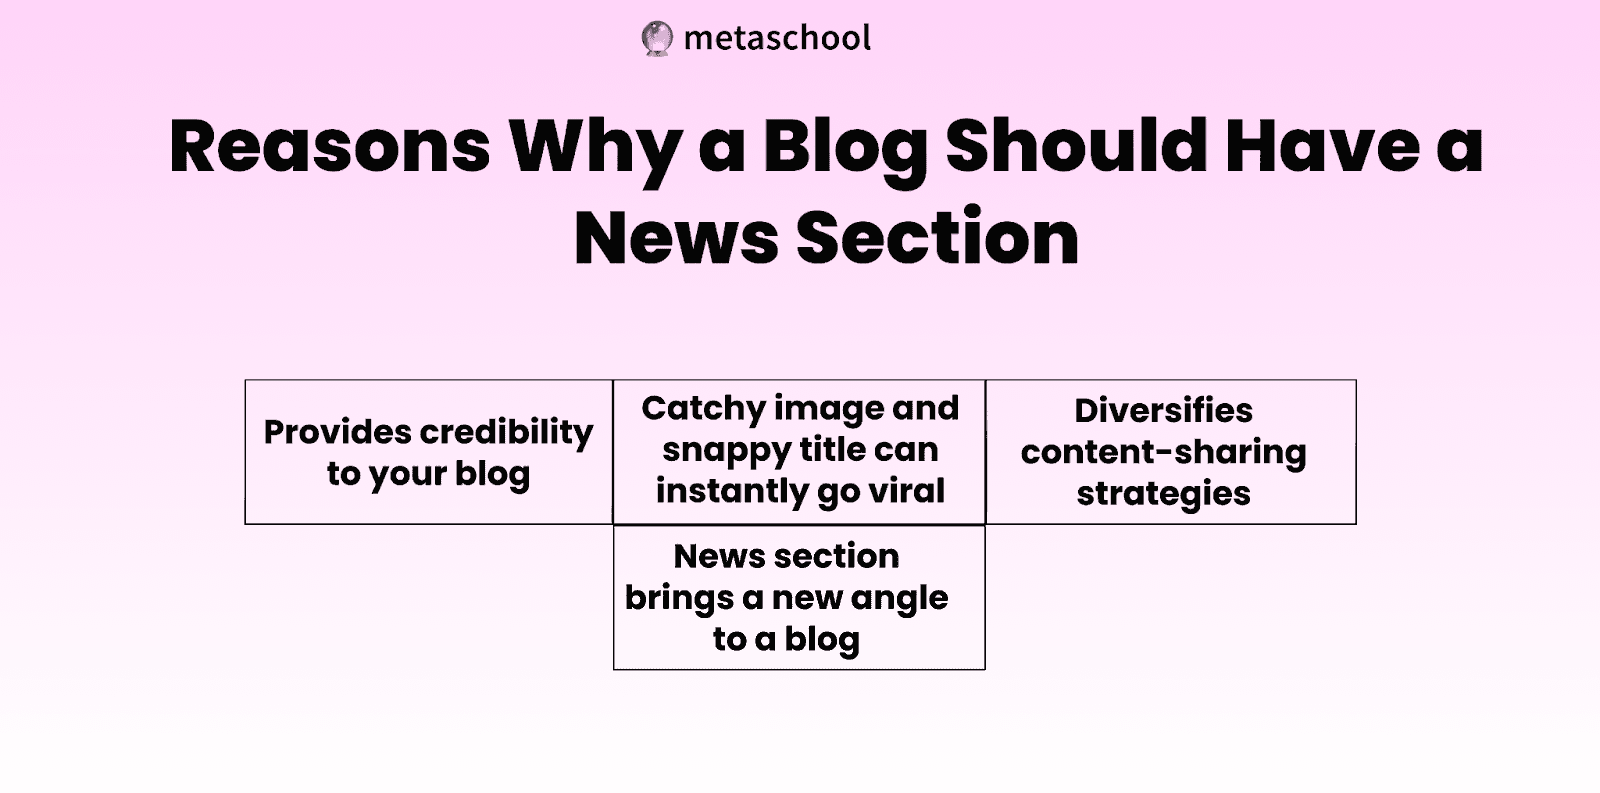 Why a blog should have news sectiob.png